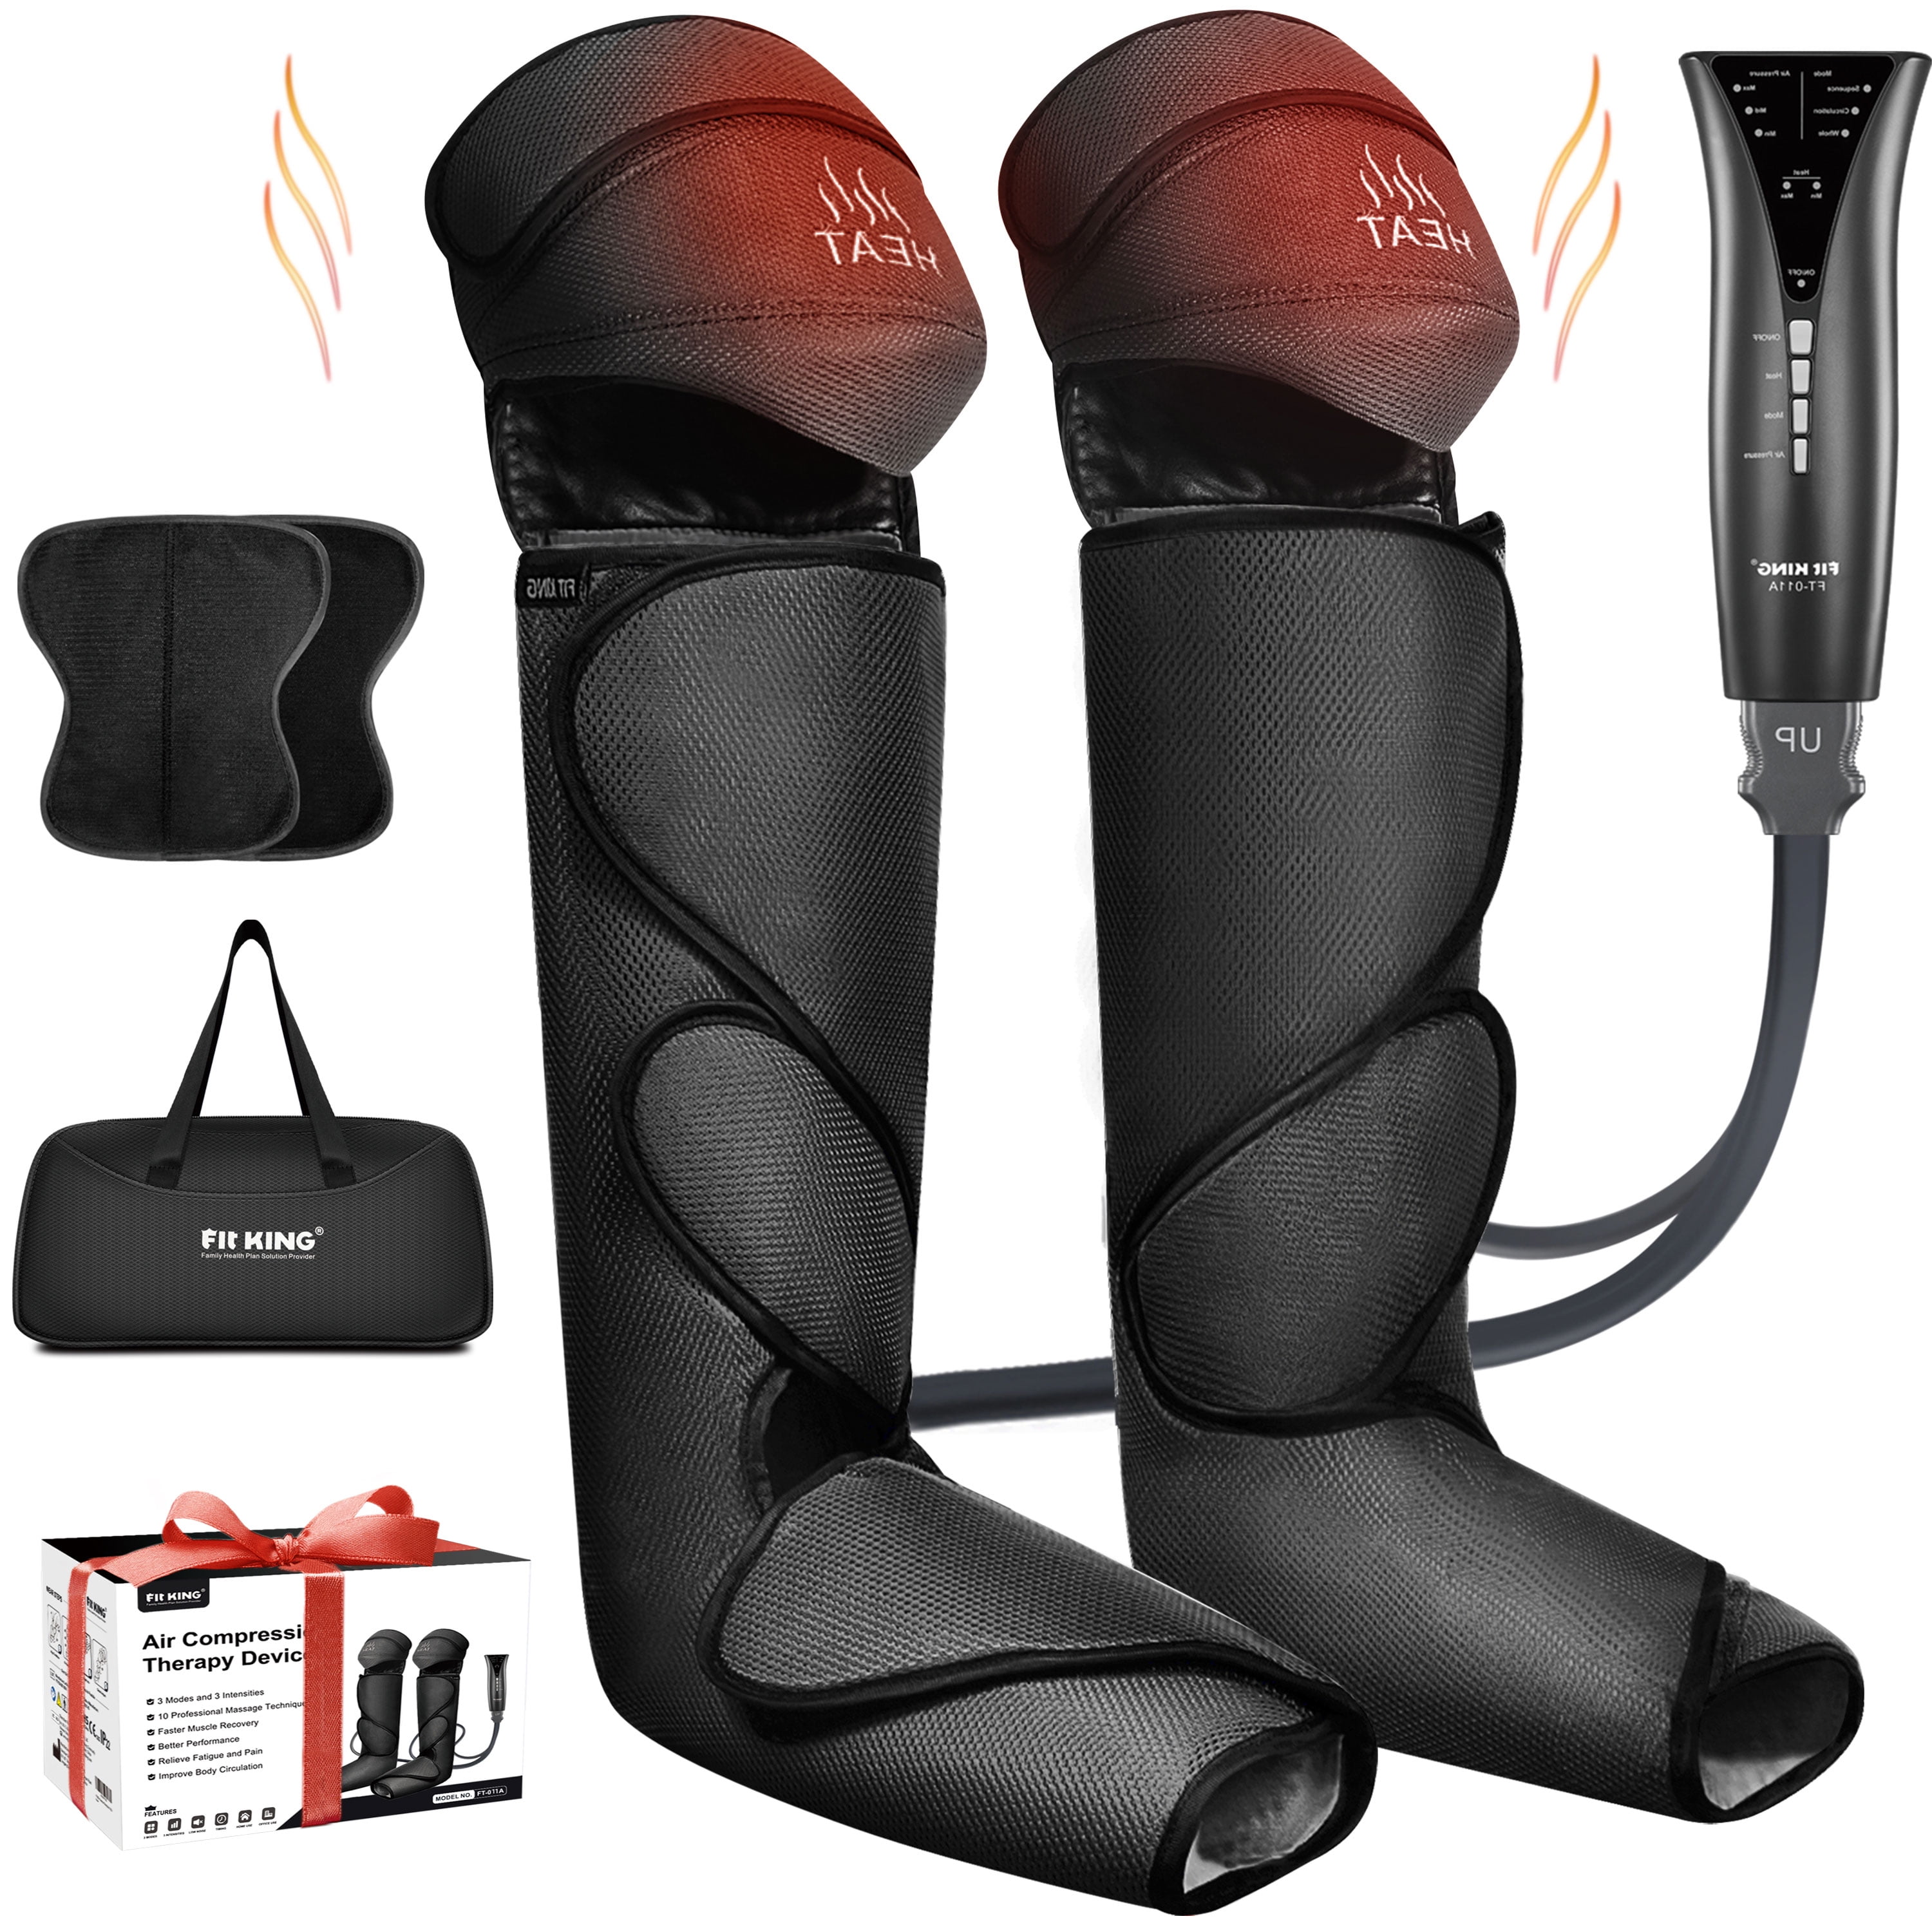 FIT KING Leg and Foot Massager for Circulation with Knee Heat, Handheld Controller with Multiple Massage, for Relaxation Muscles FSA/HSA Eligible